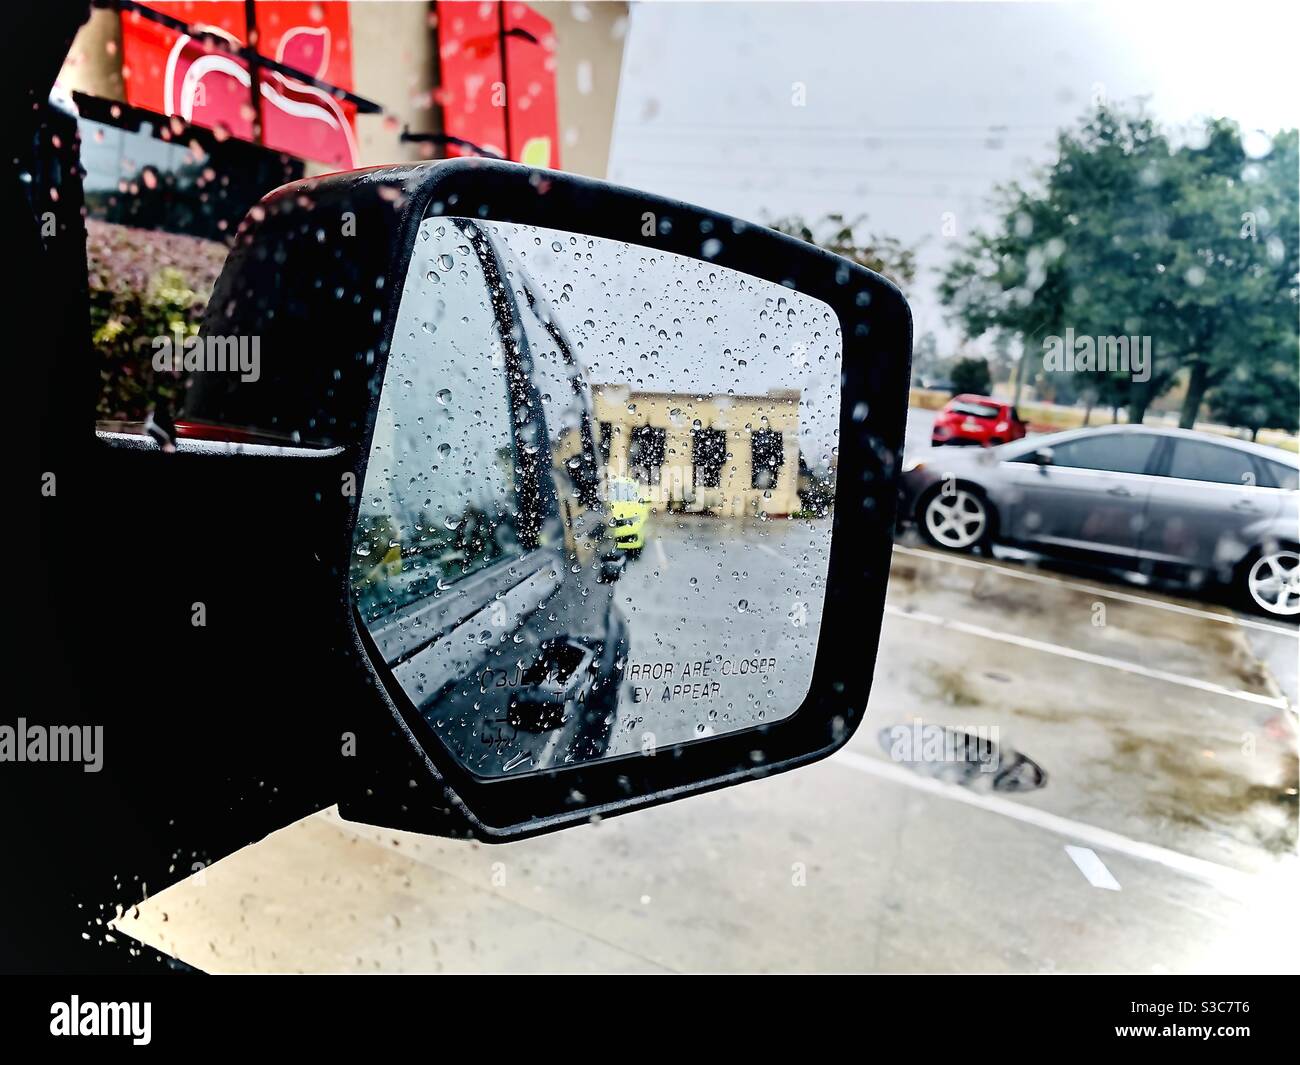 Rain with rear view in North Florida as 2020 ends. Stock Photo